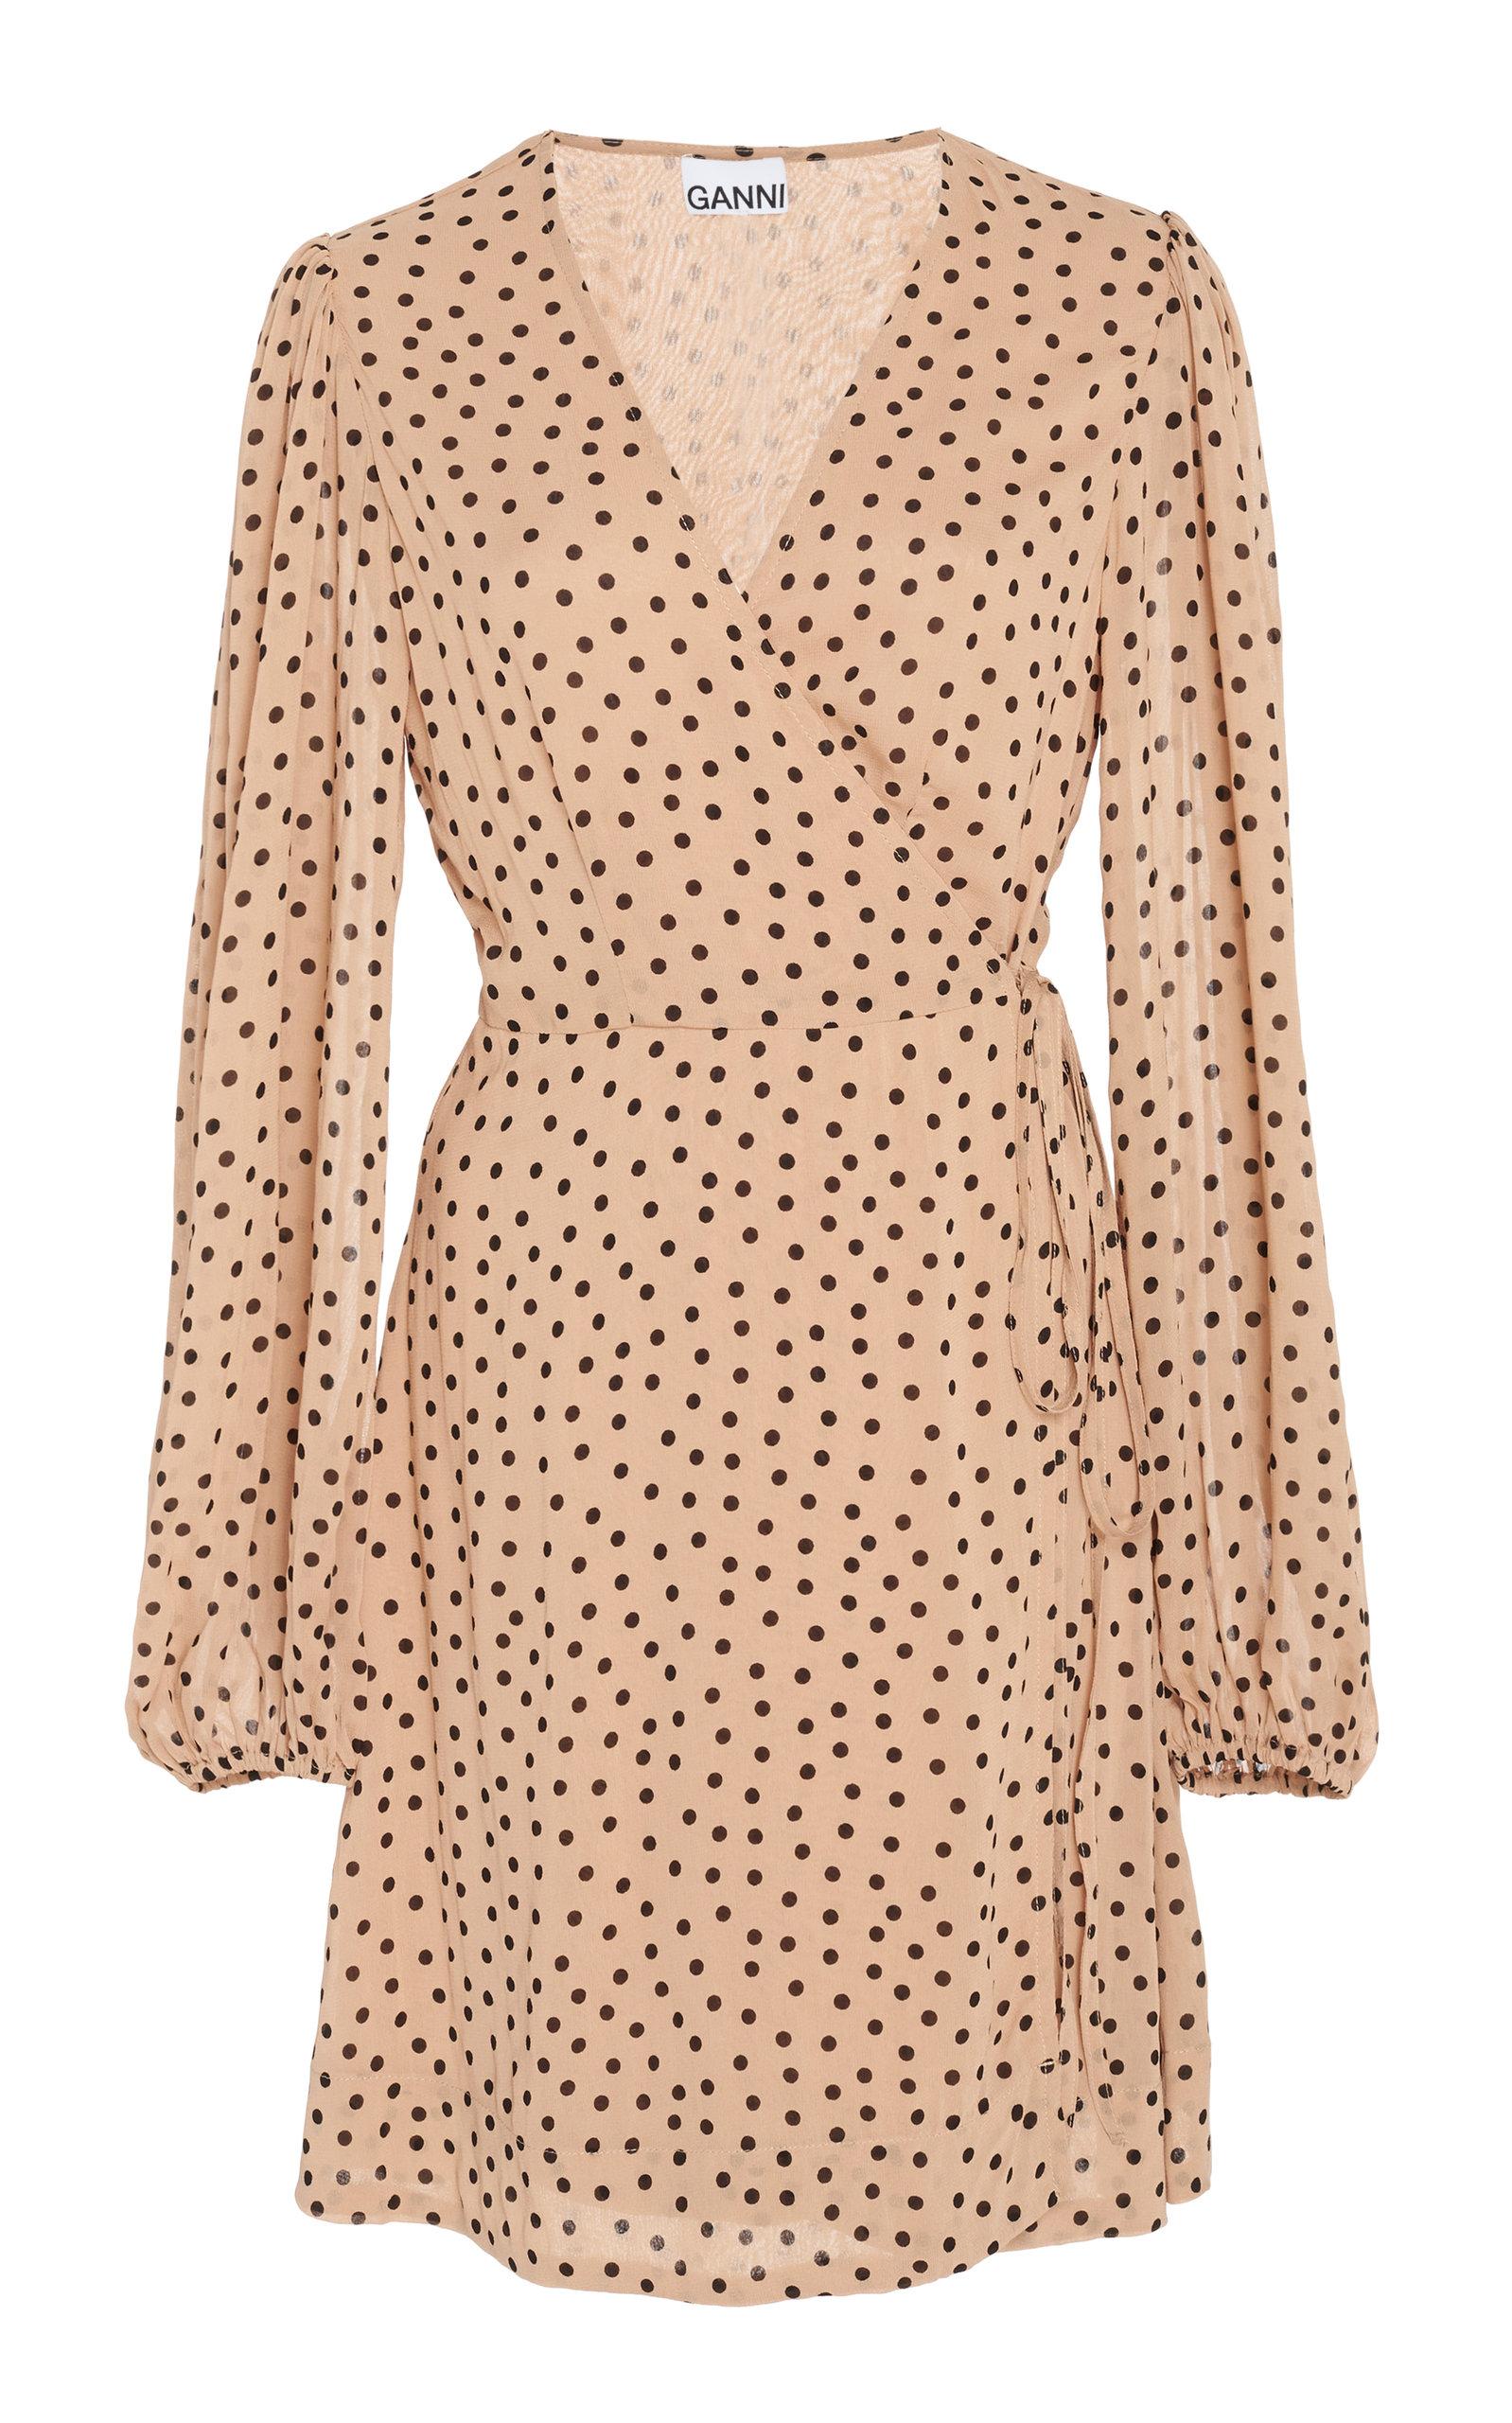 Ganni Synthetic Polka-dot Georgette Mini Wrap Dress in Natural - Lyst